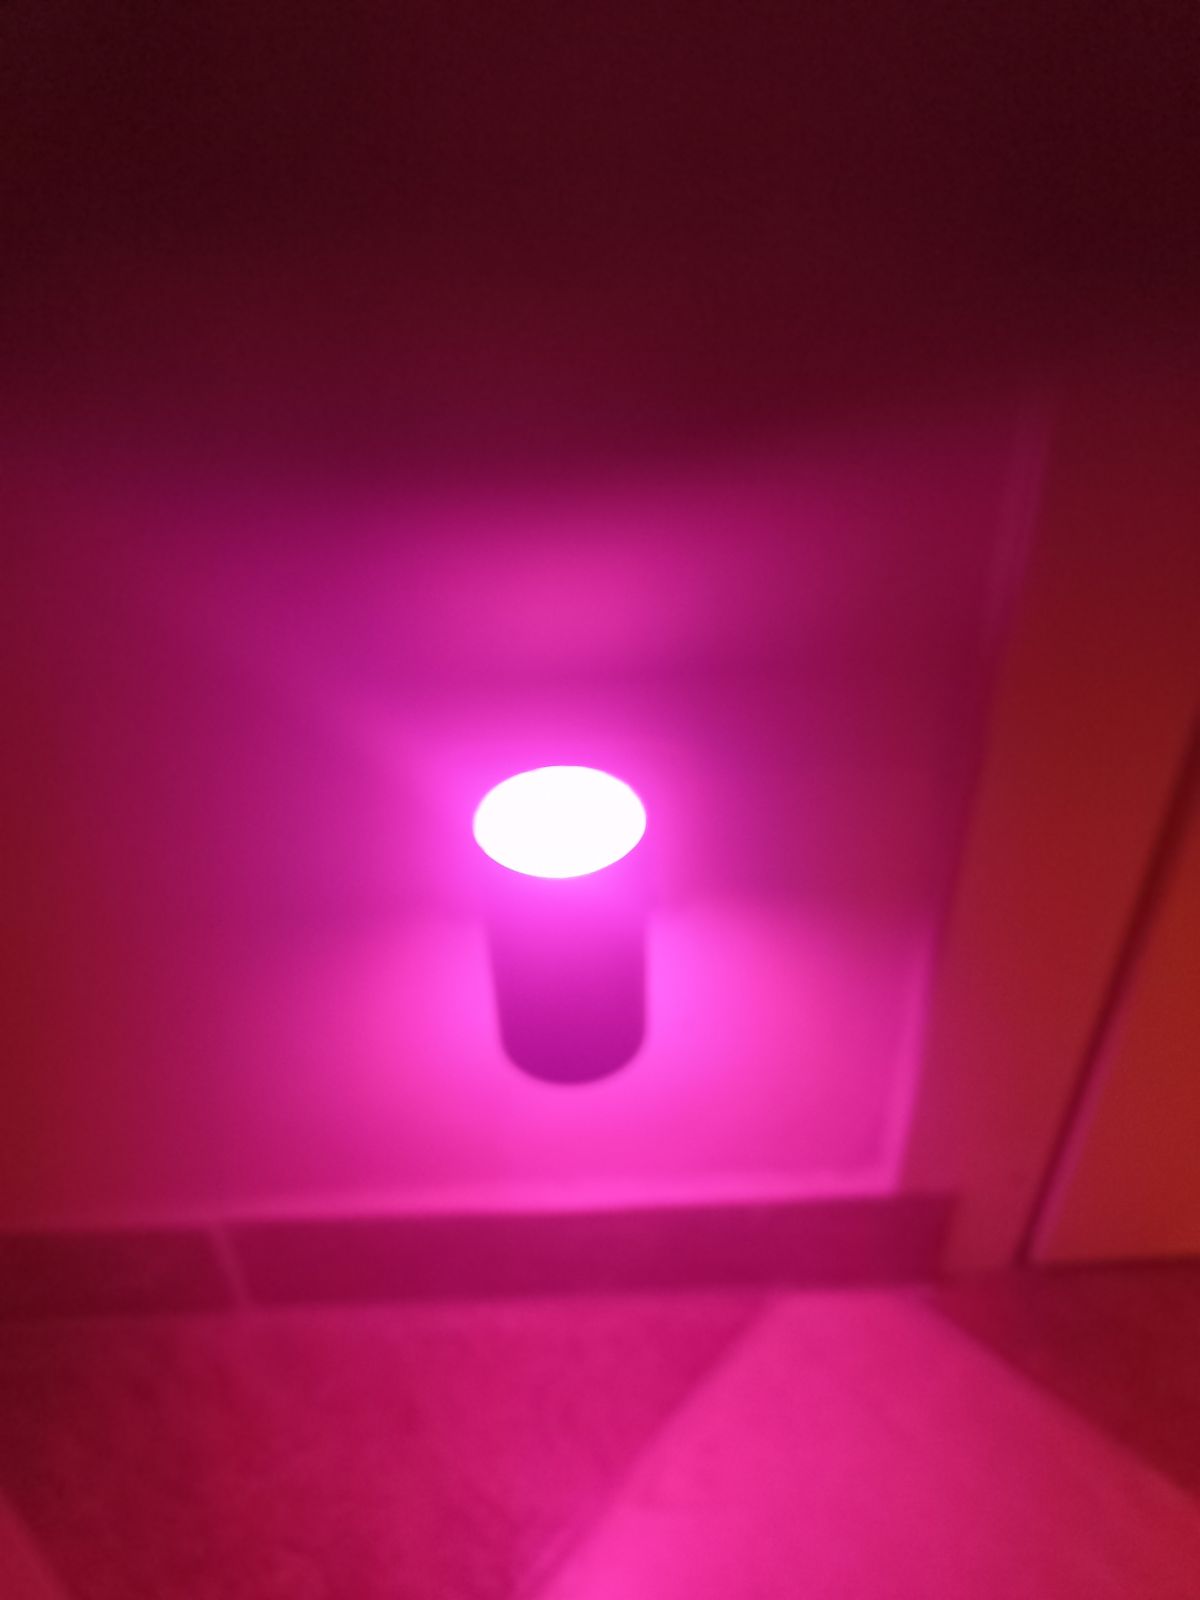 LED night light socket dimmable color changing